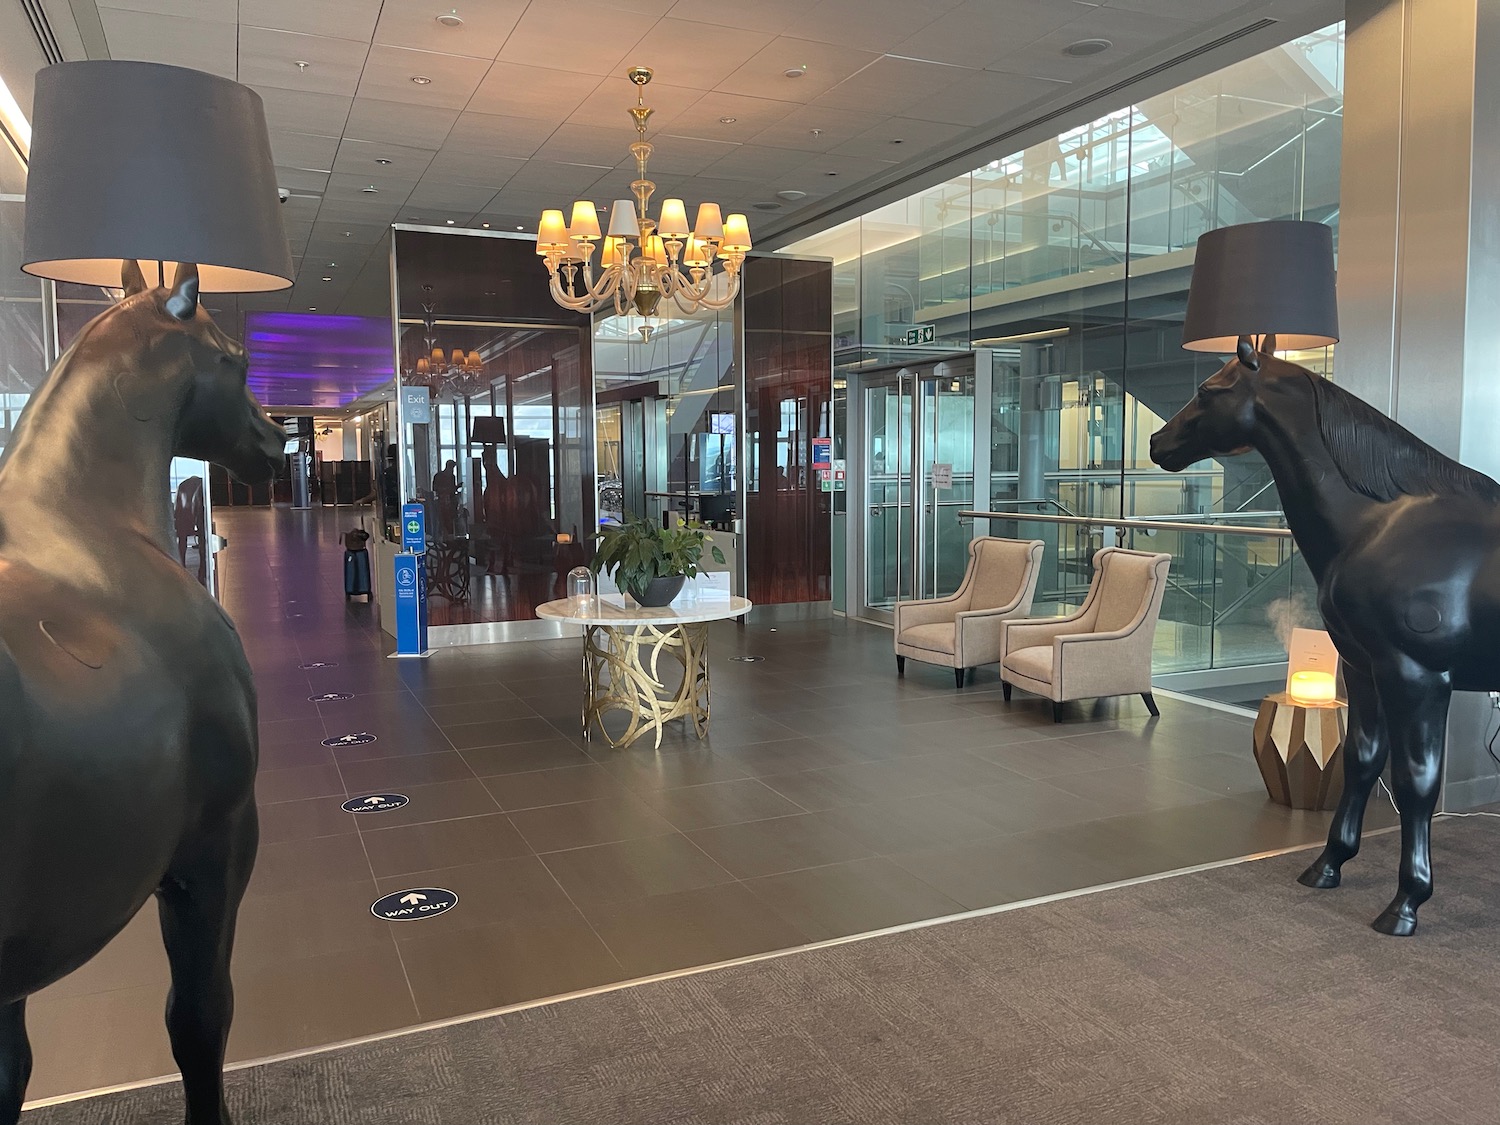 a large black horse statues in a lobby